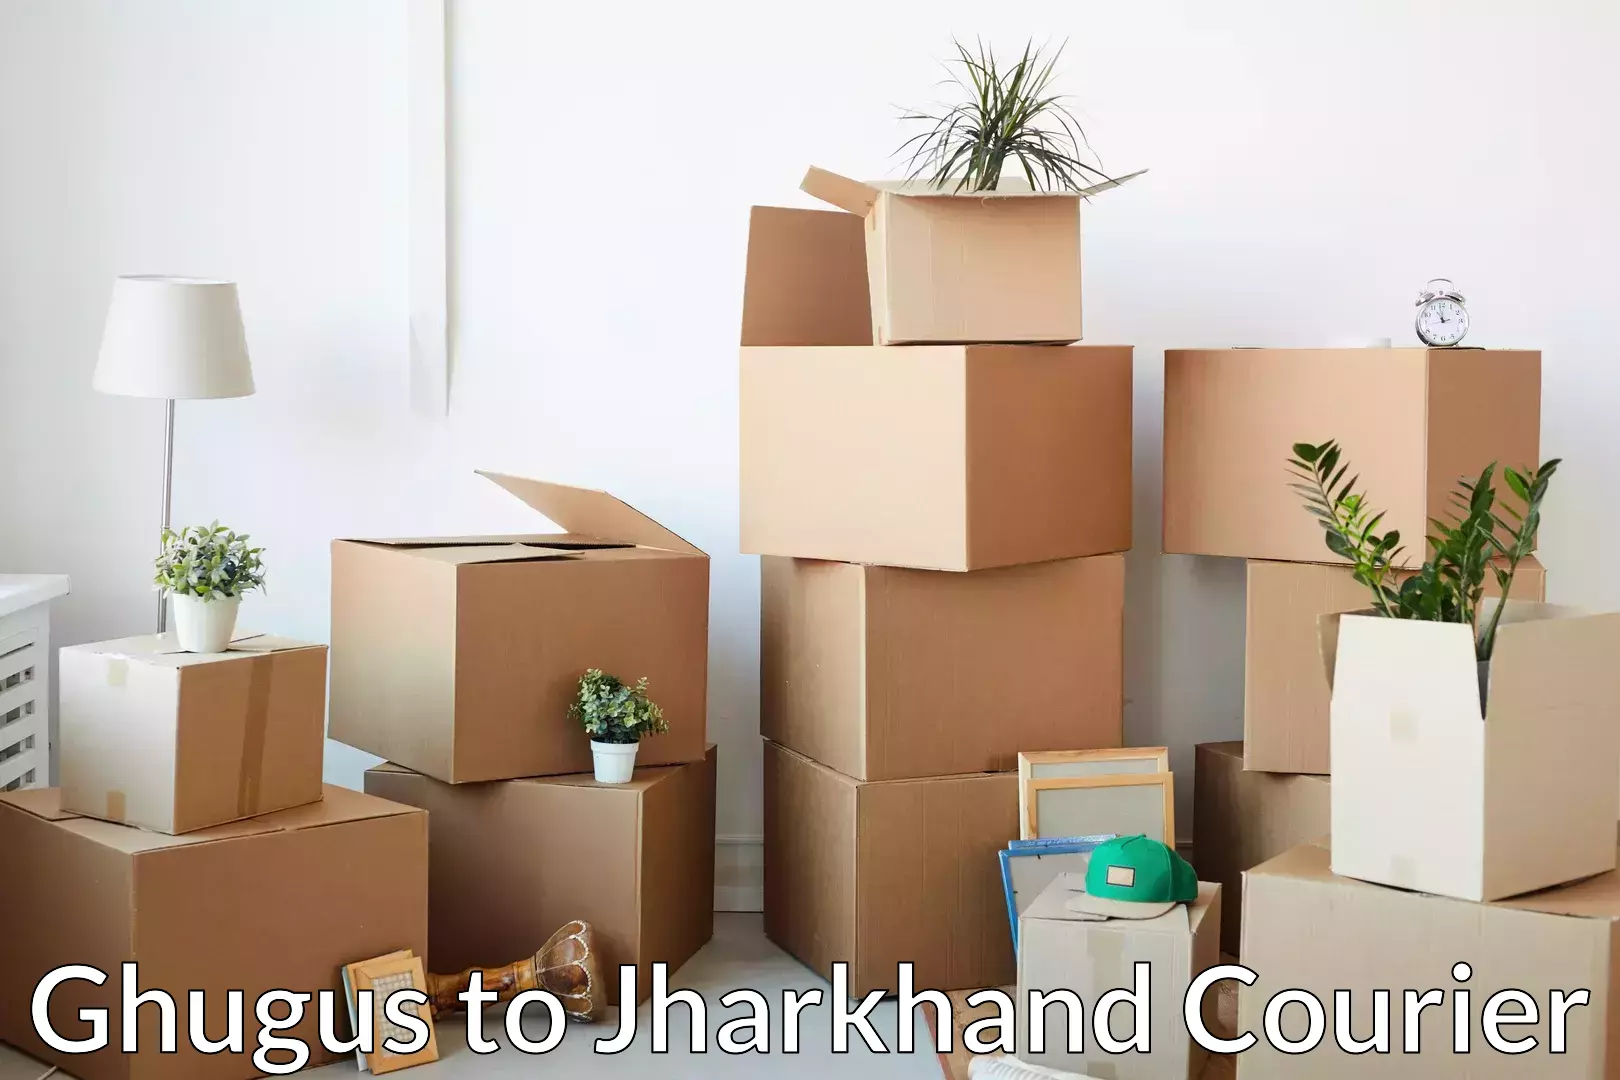 Furniture moving experts Ghugus to Jharkhand